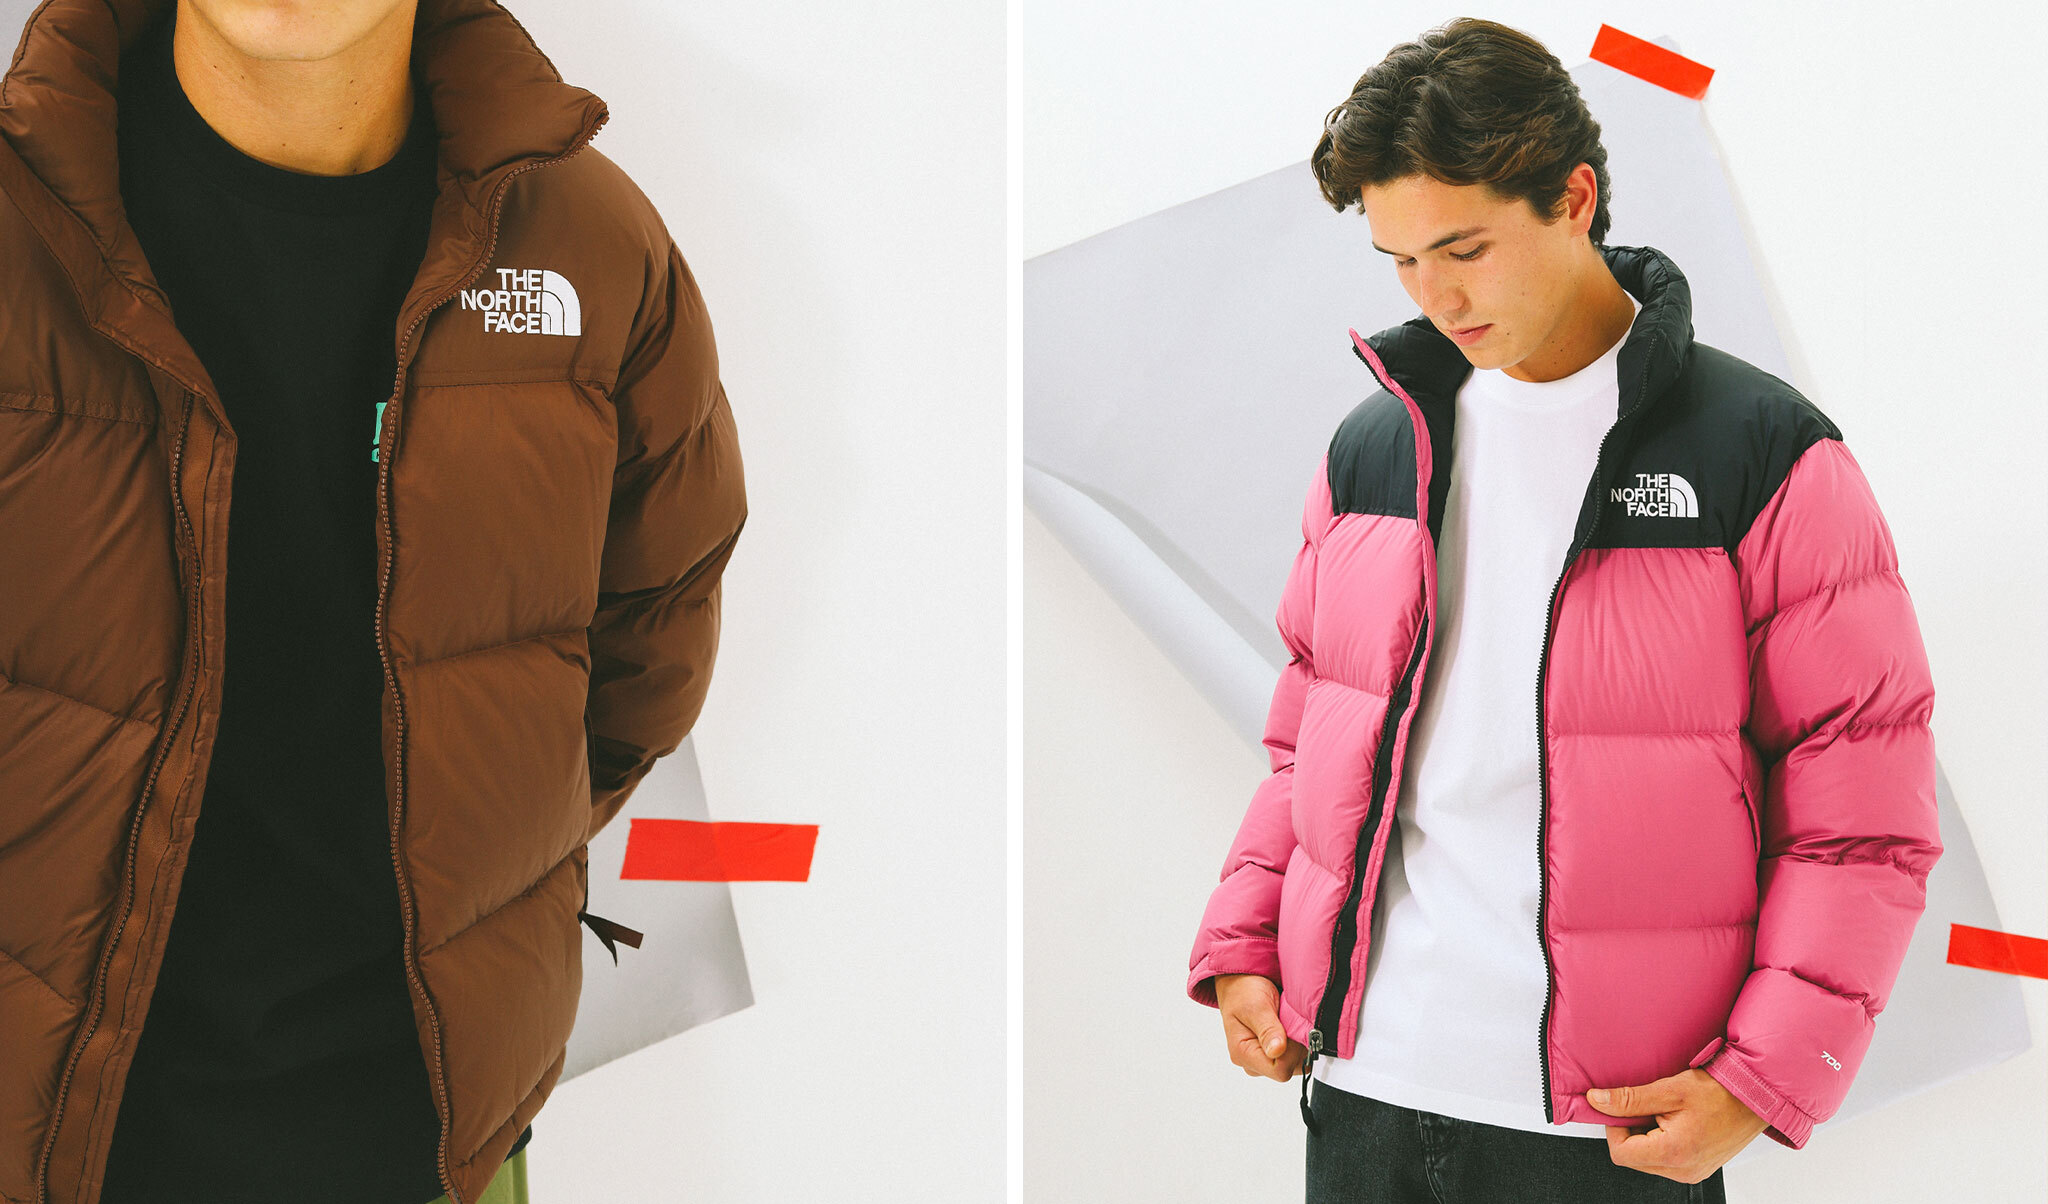 Iconic: The North Face puffers